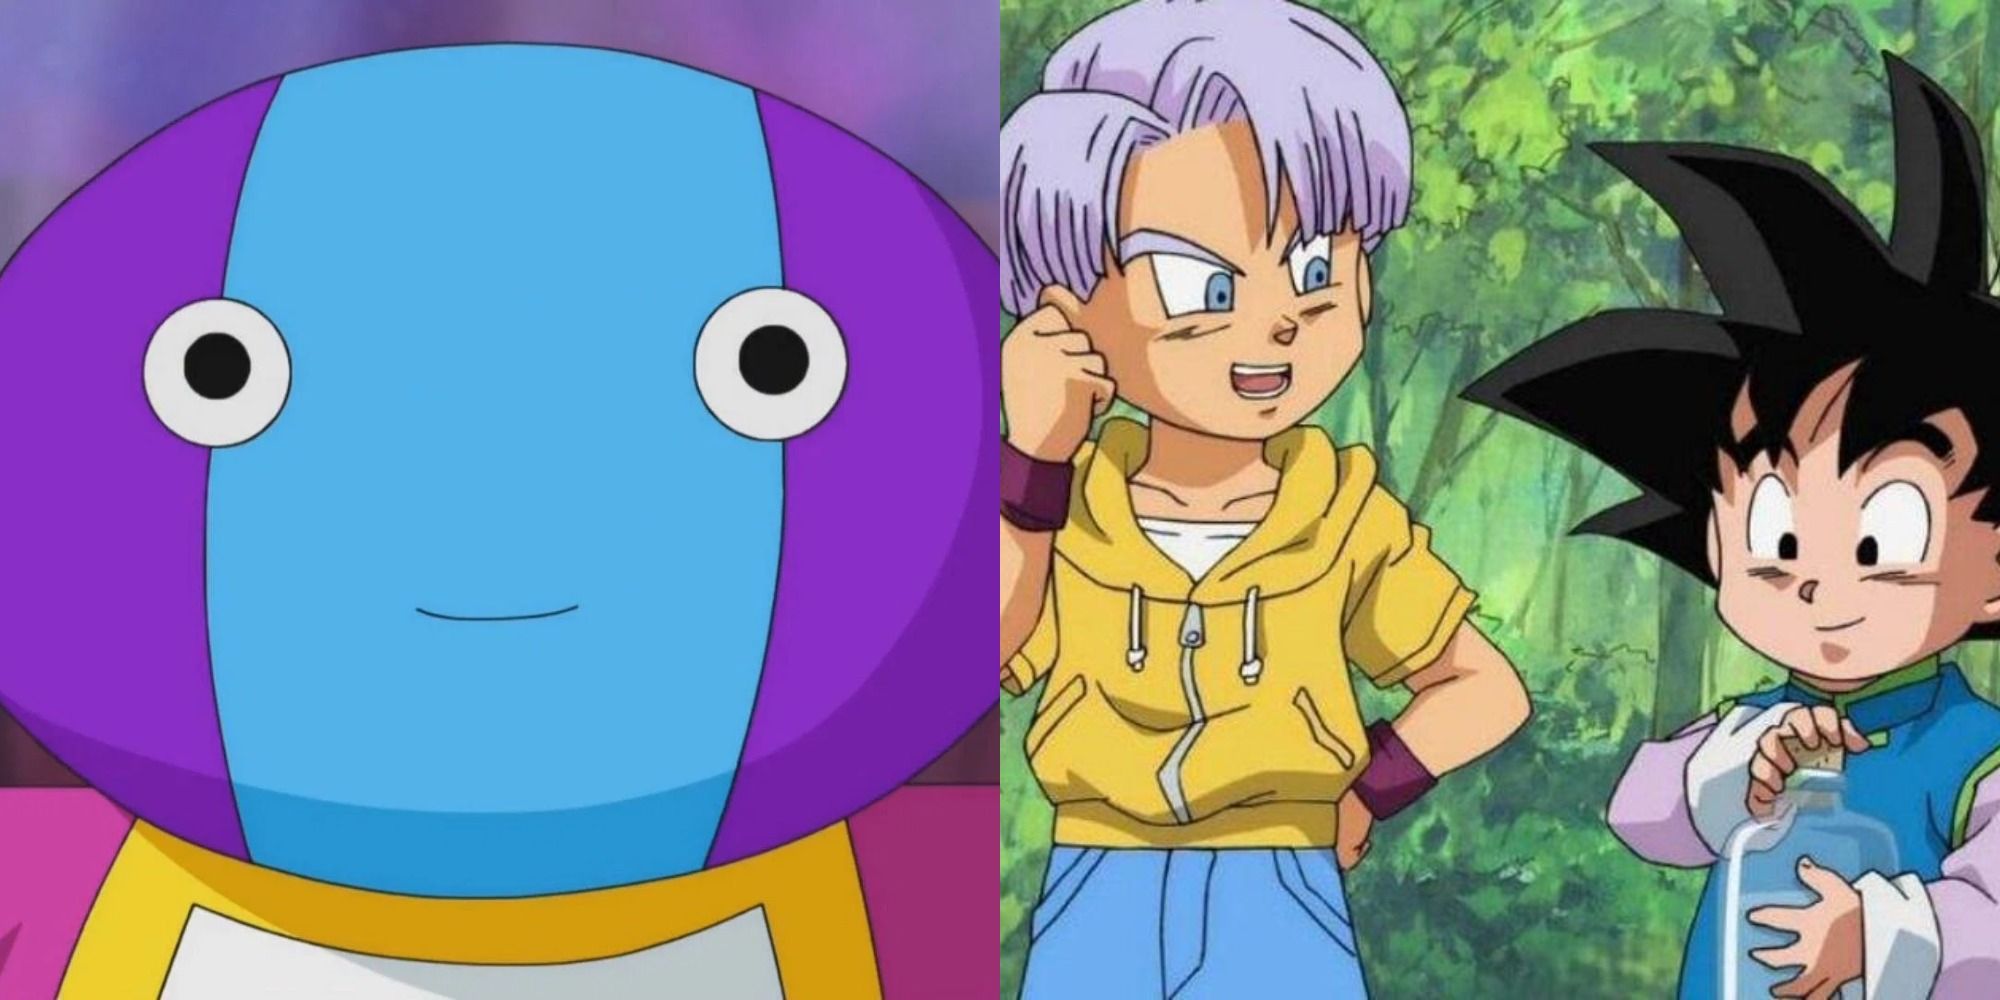 Split image showing Omni King and Goten and Trunks in Dragon Ball Super.